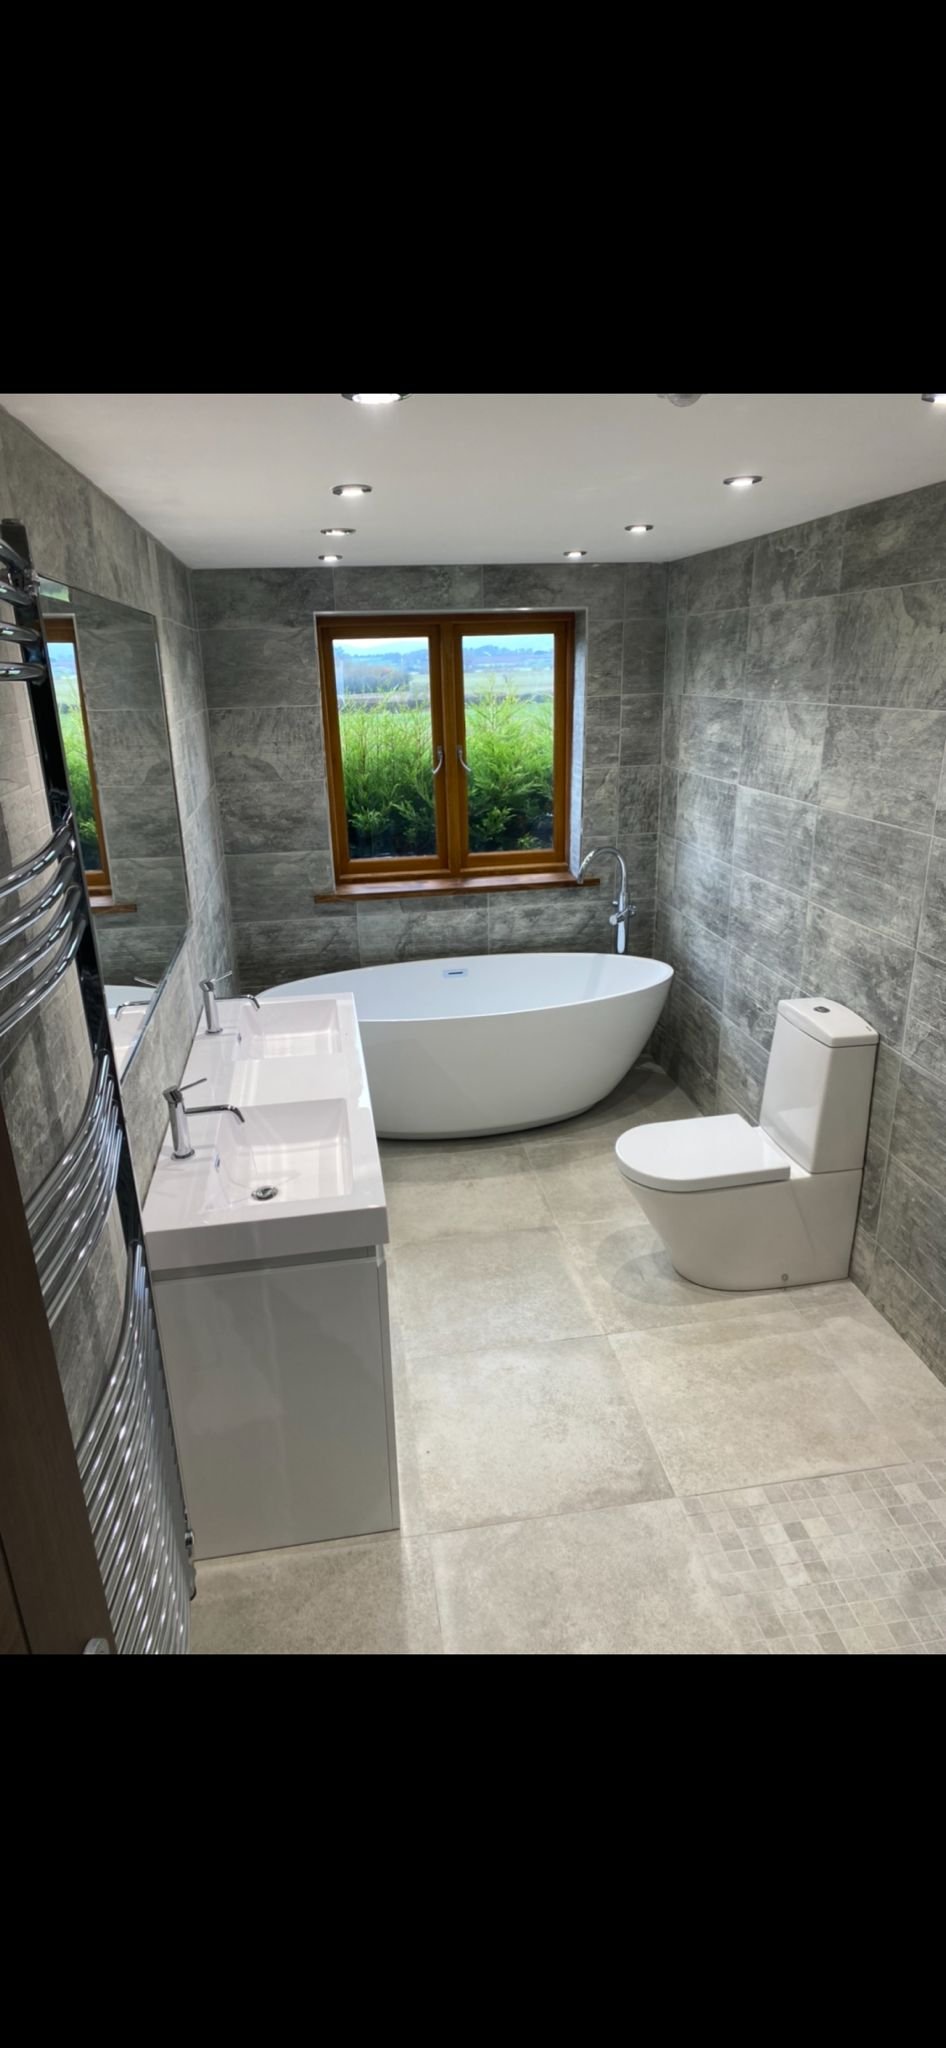 Previous project featuring oval shaped free standing bath